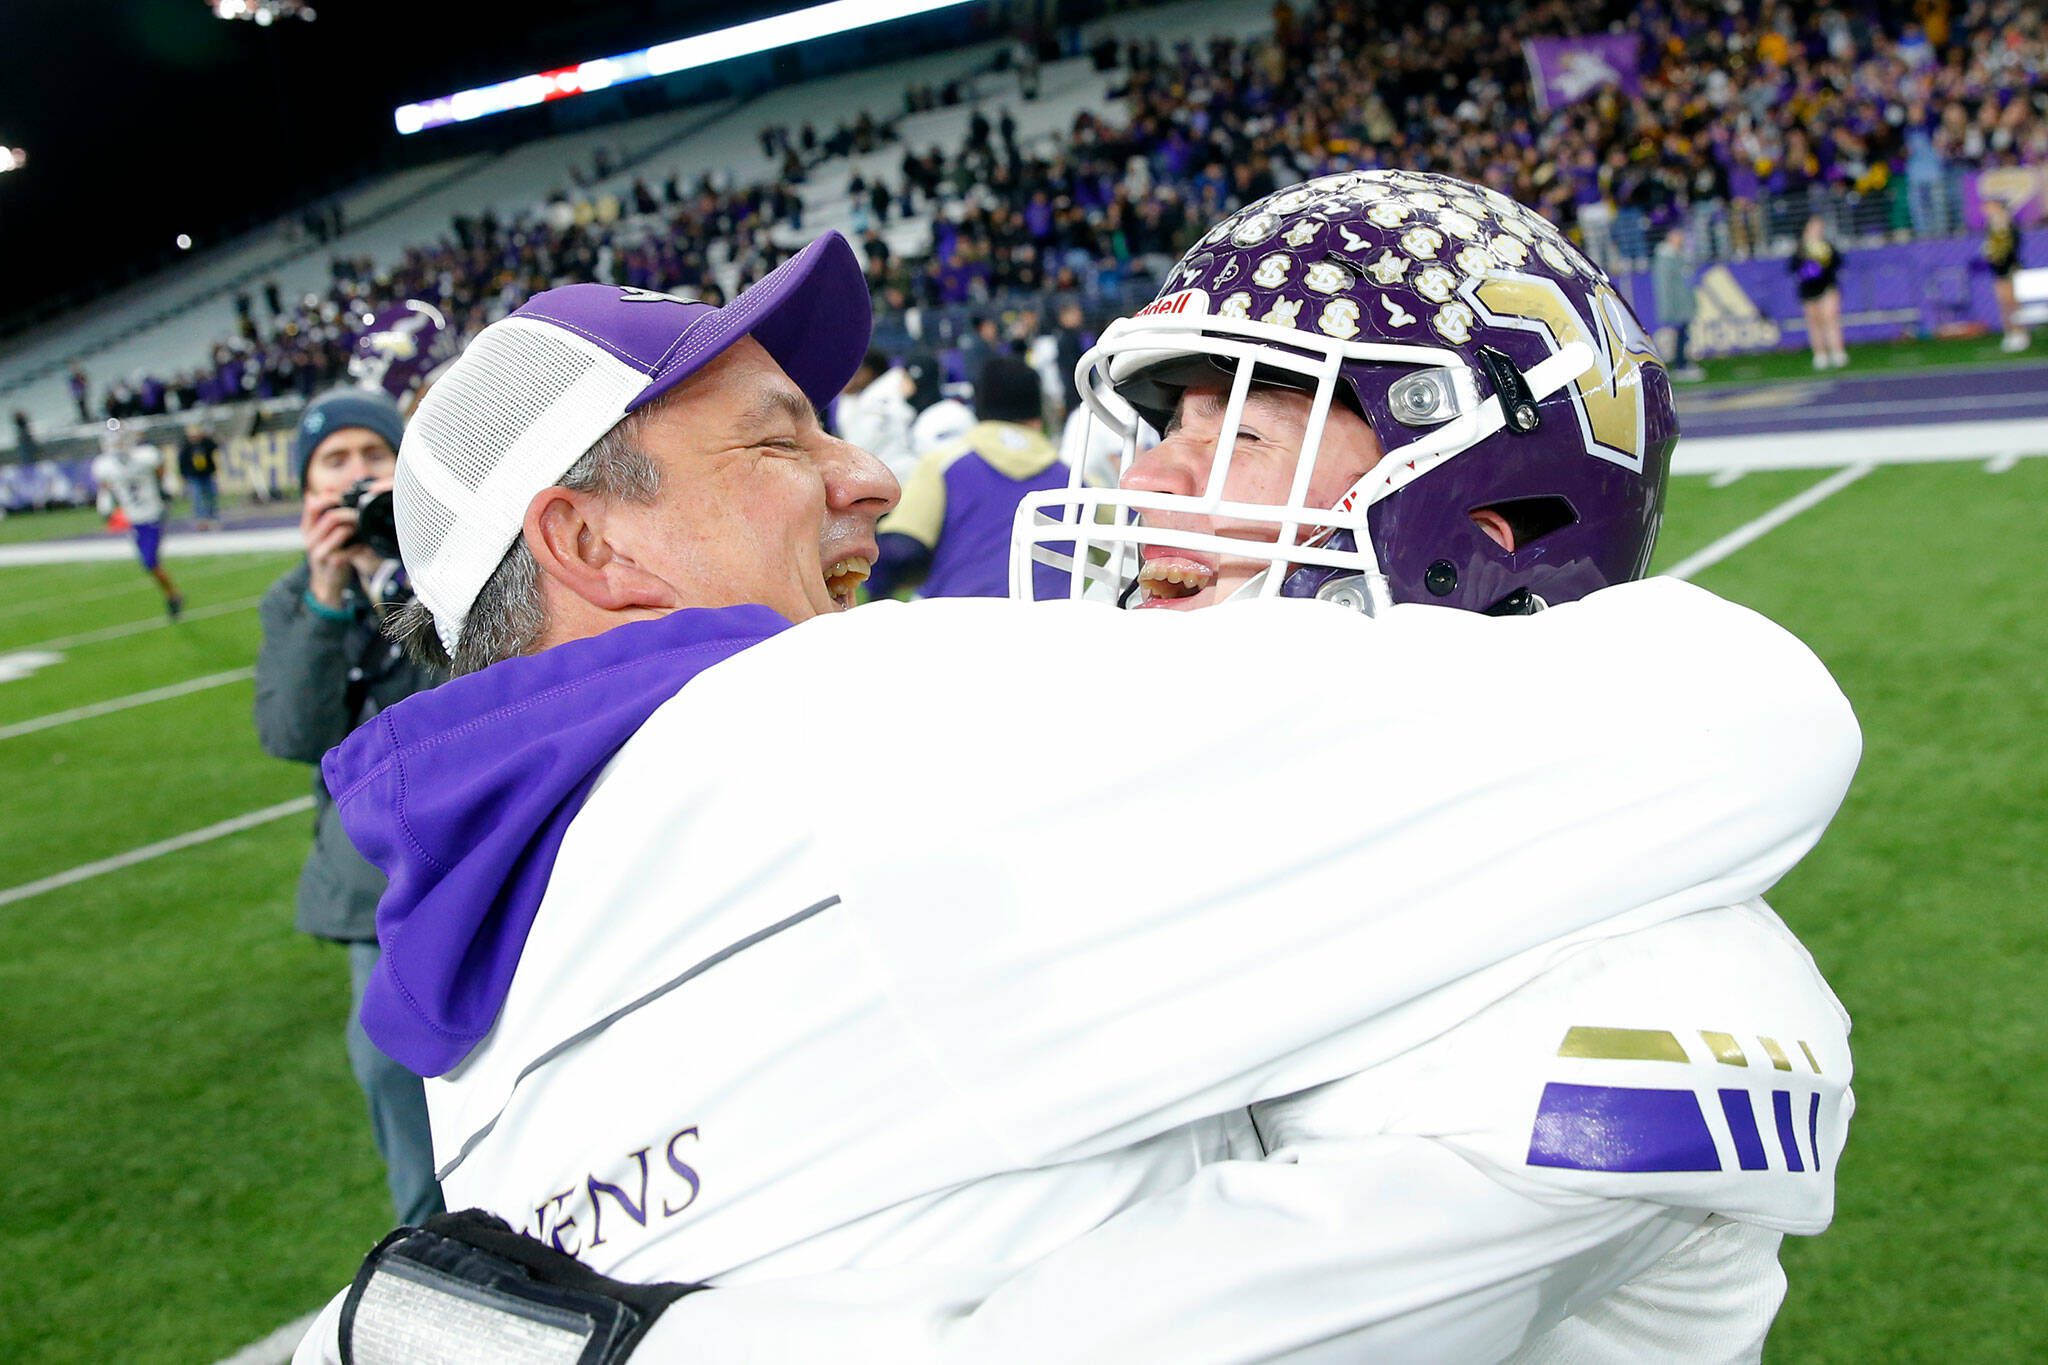 Lake Stevens head coach Tom Tri hugs quarterback Kolton Matson after the Vikings’ victory against Graham-Kapowsin in the Class 4A state championship game Saturday at Husky Stadium in Seattle. (Ryan Berry / The Herald)